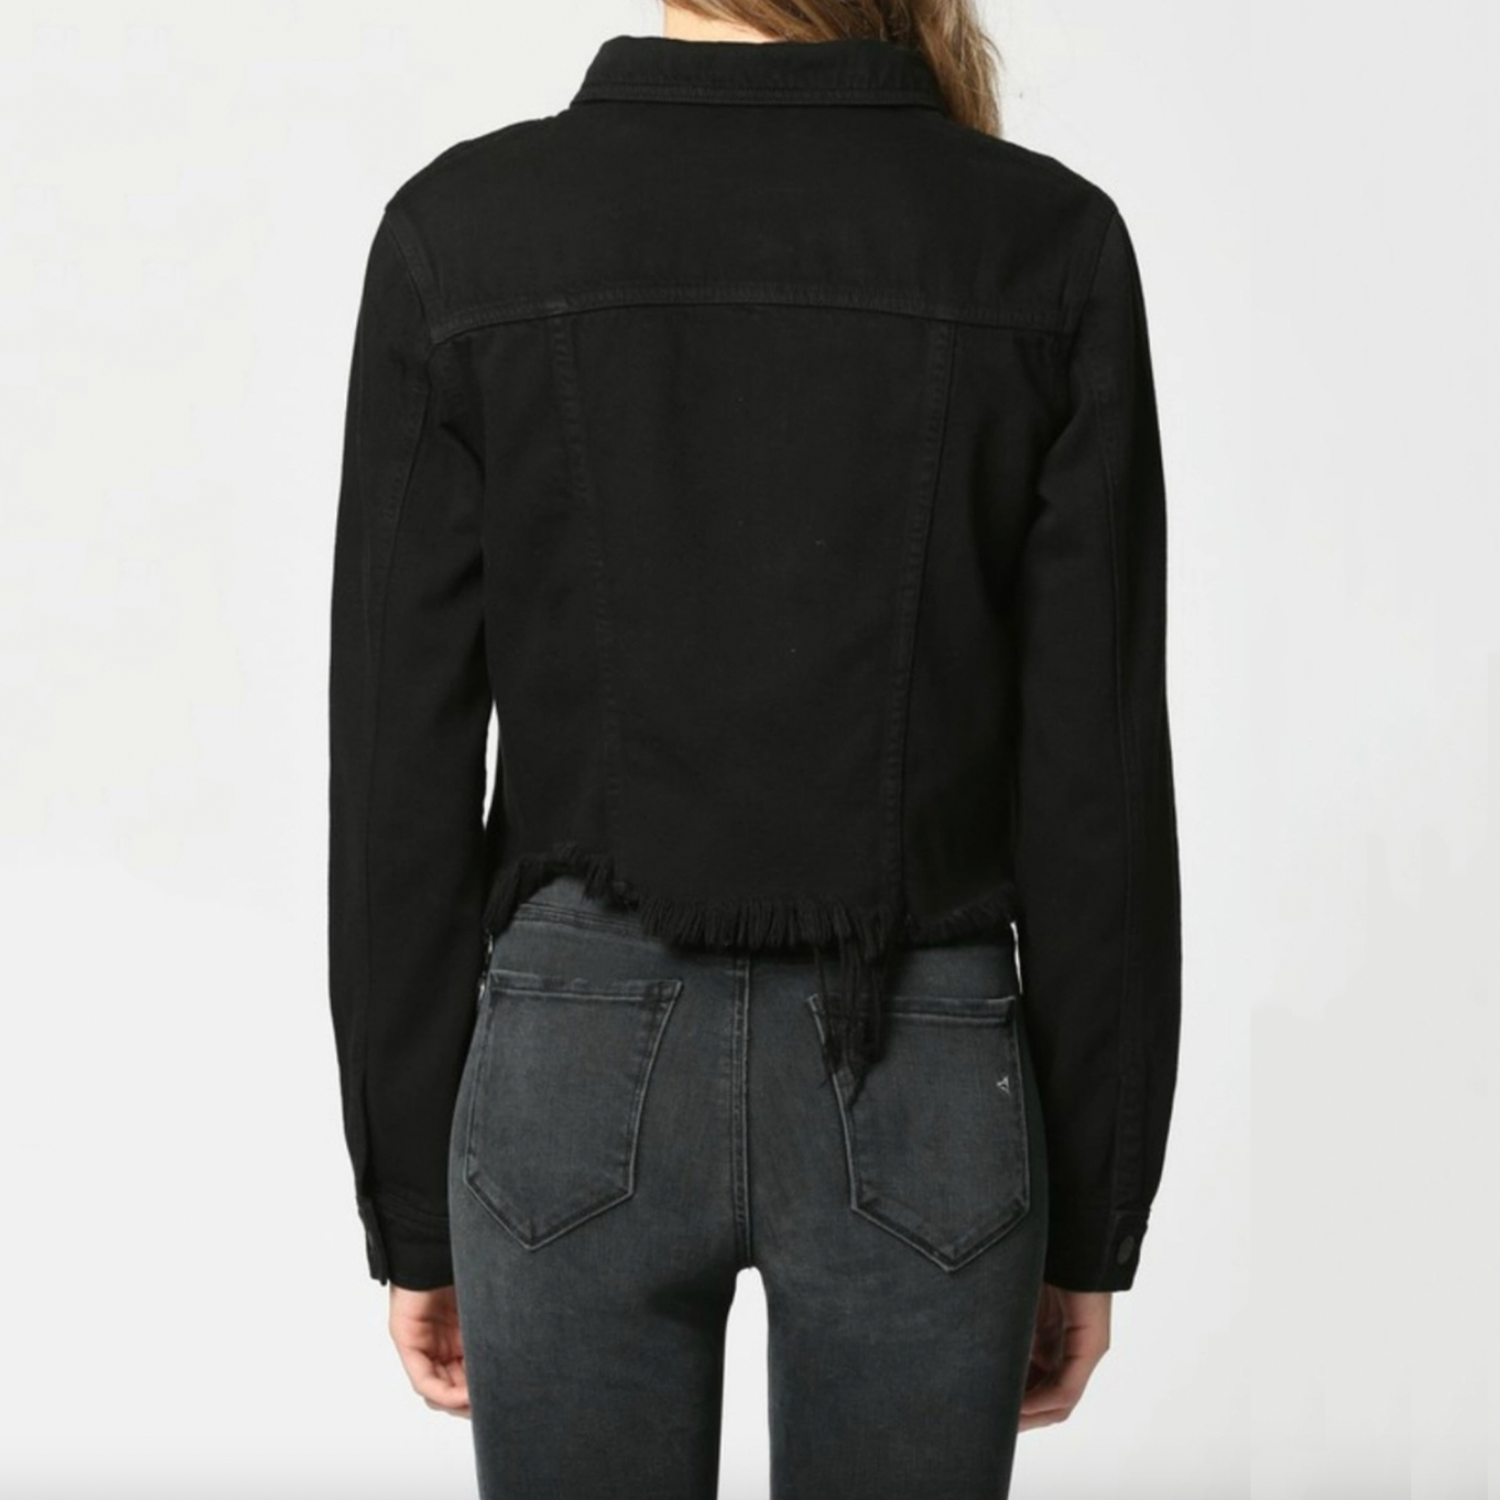 Hidden Regular Fitted Jacket. A Hidden jacket is a must-have in your closet rotation! This jacket features a slightly cropped fit and a frayed hem